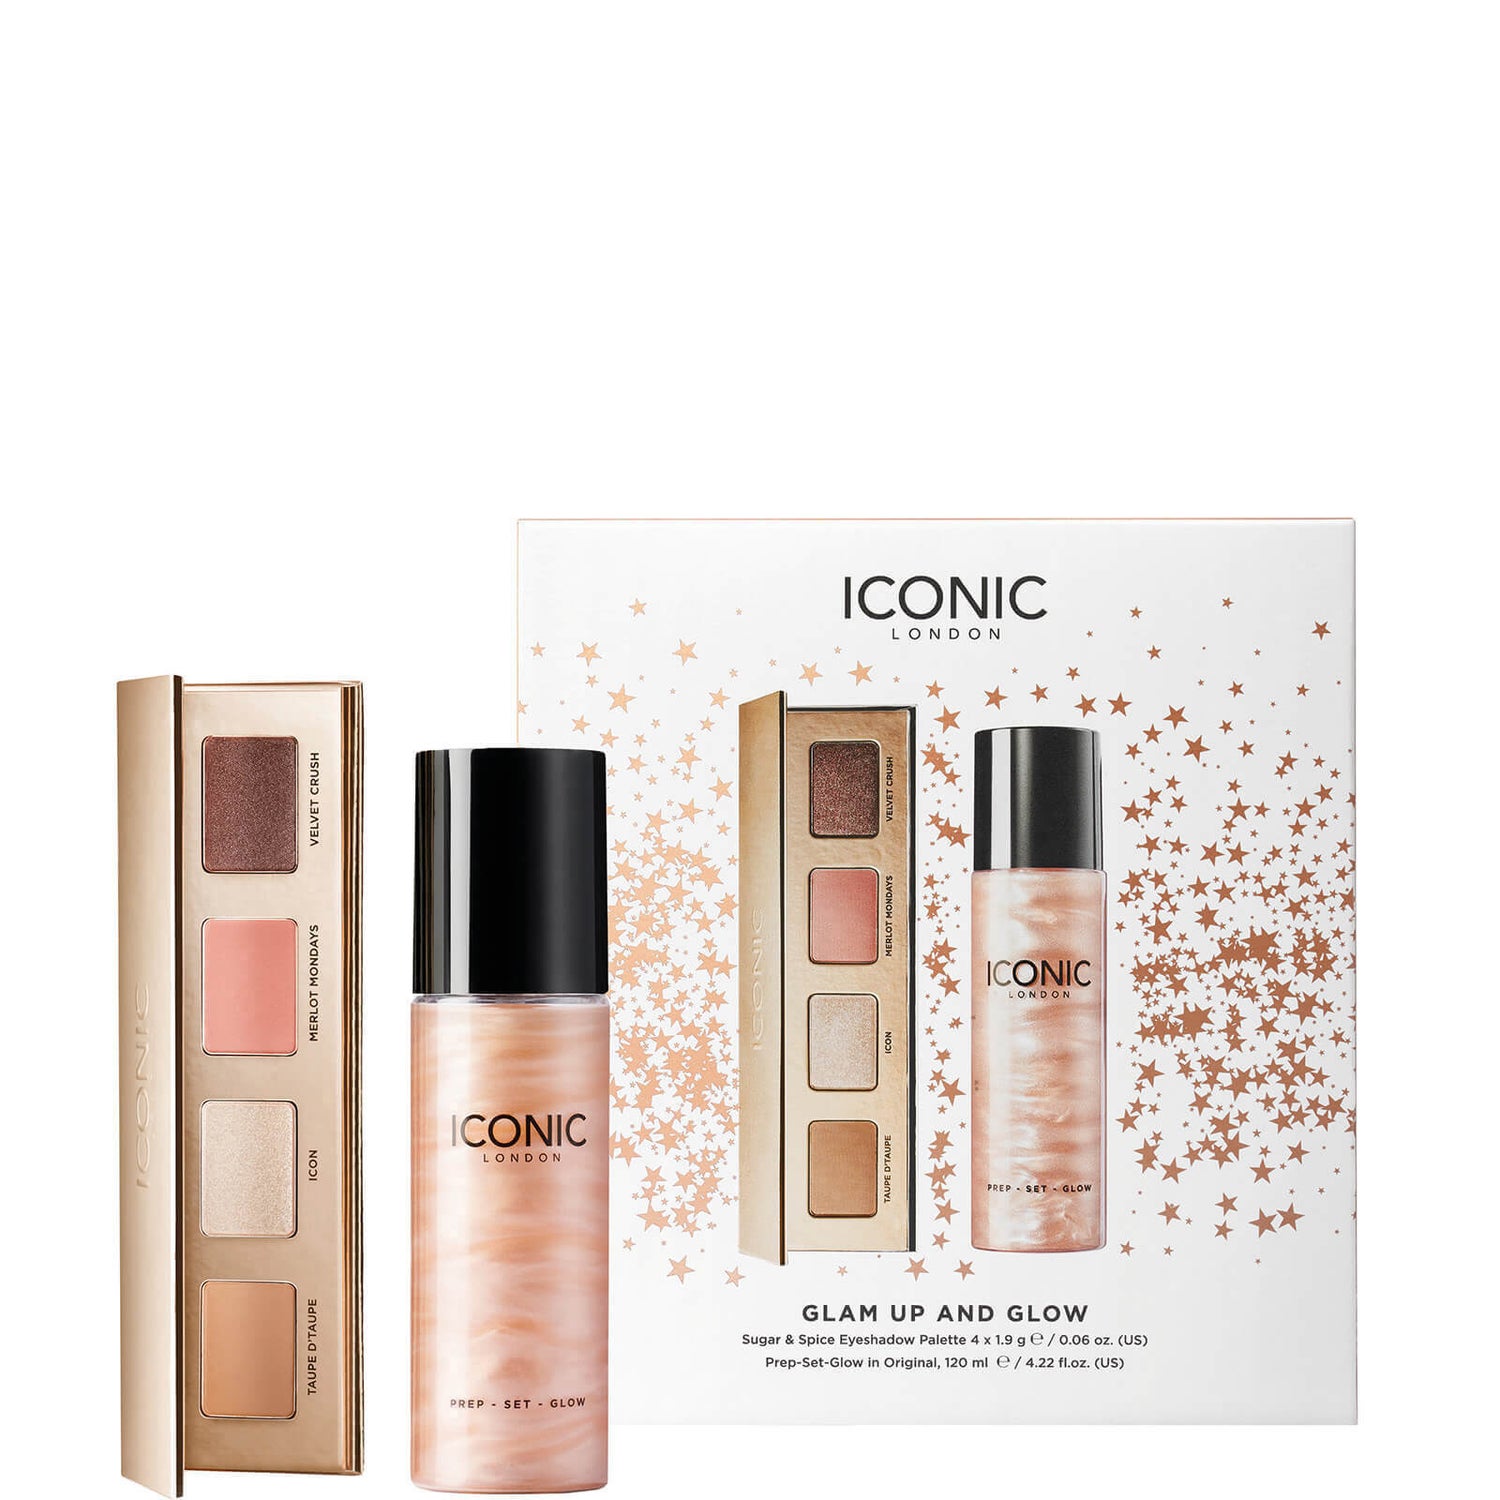 ICONIC London Glow-Up and Glam! Set | Cult Beauty